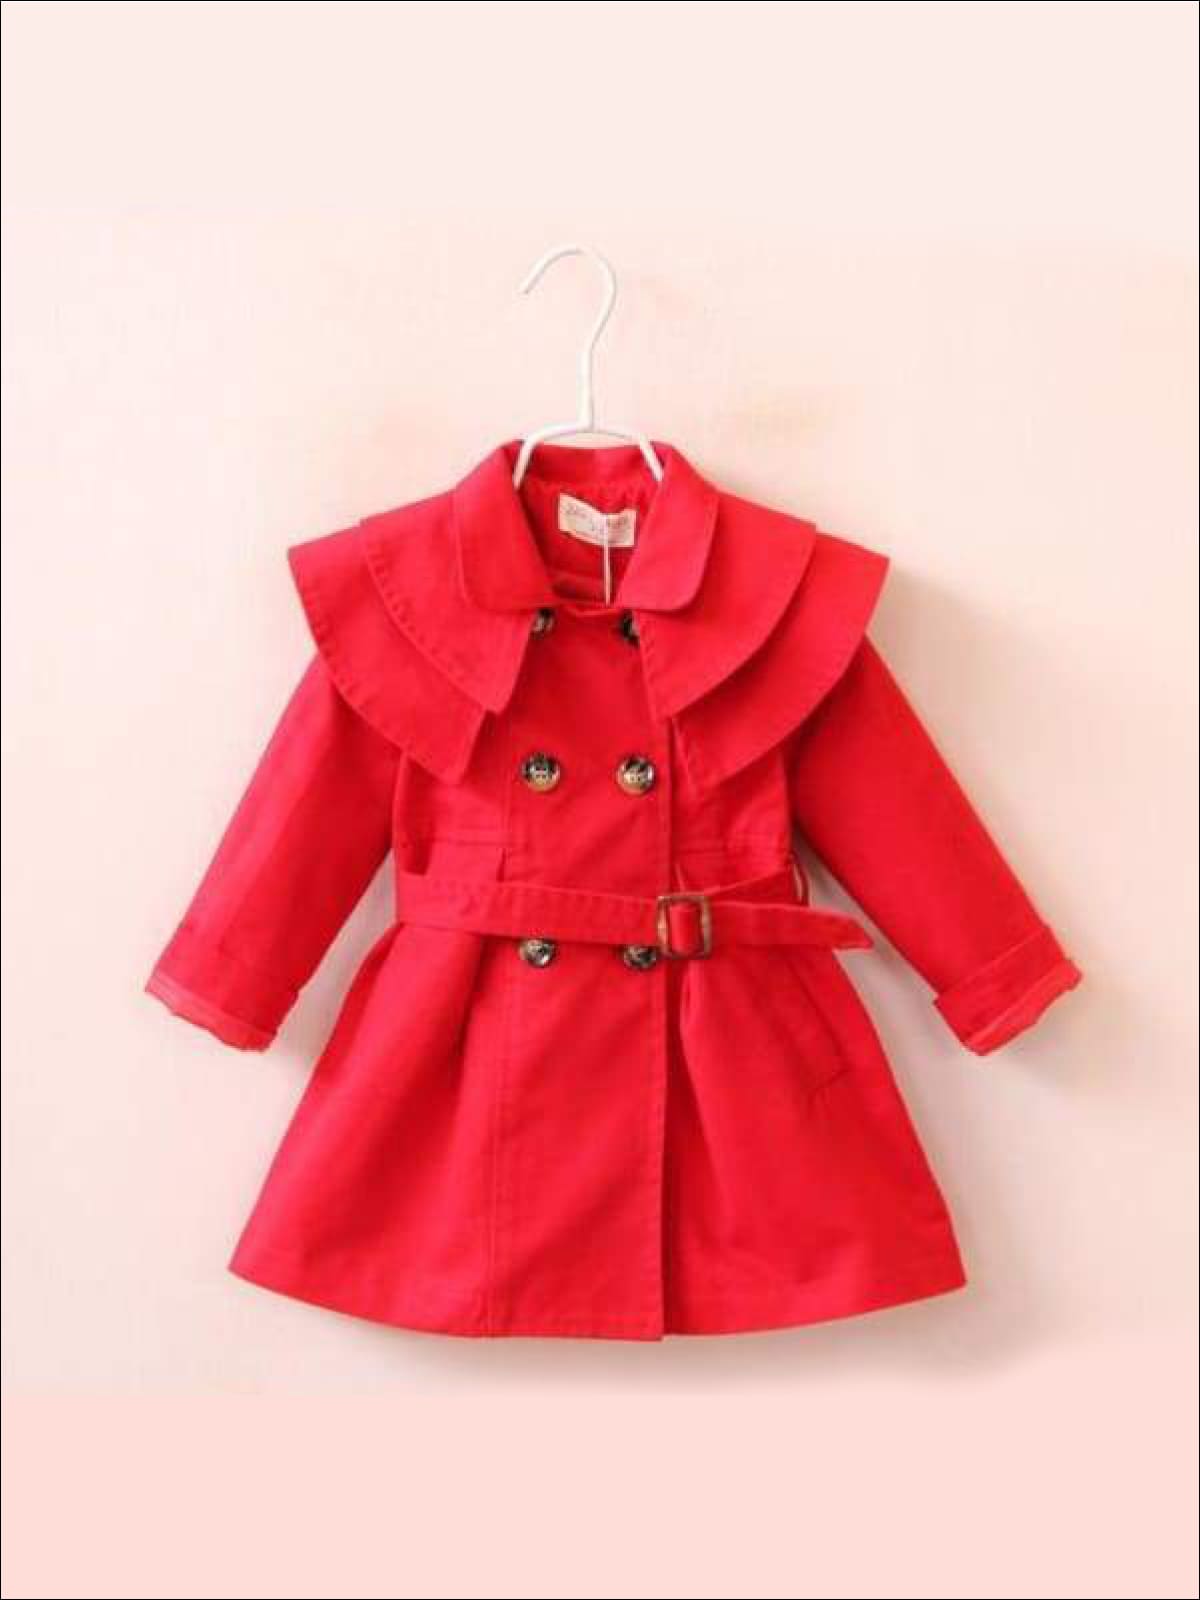 Girls Tiered Lapel Collar Trench Coat with Belt - Red / 2T - Girls Jacket